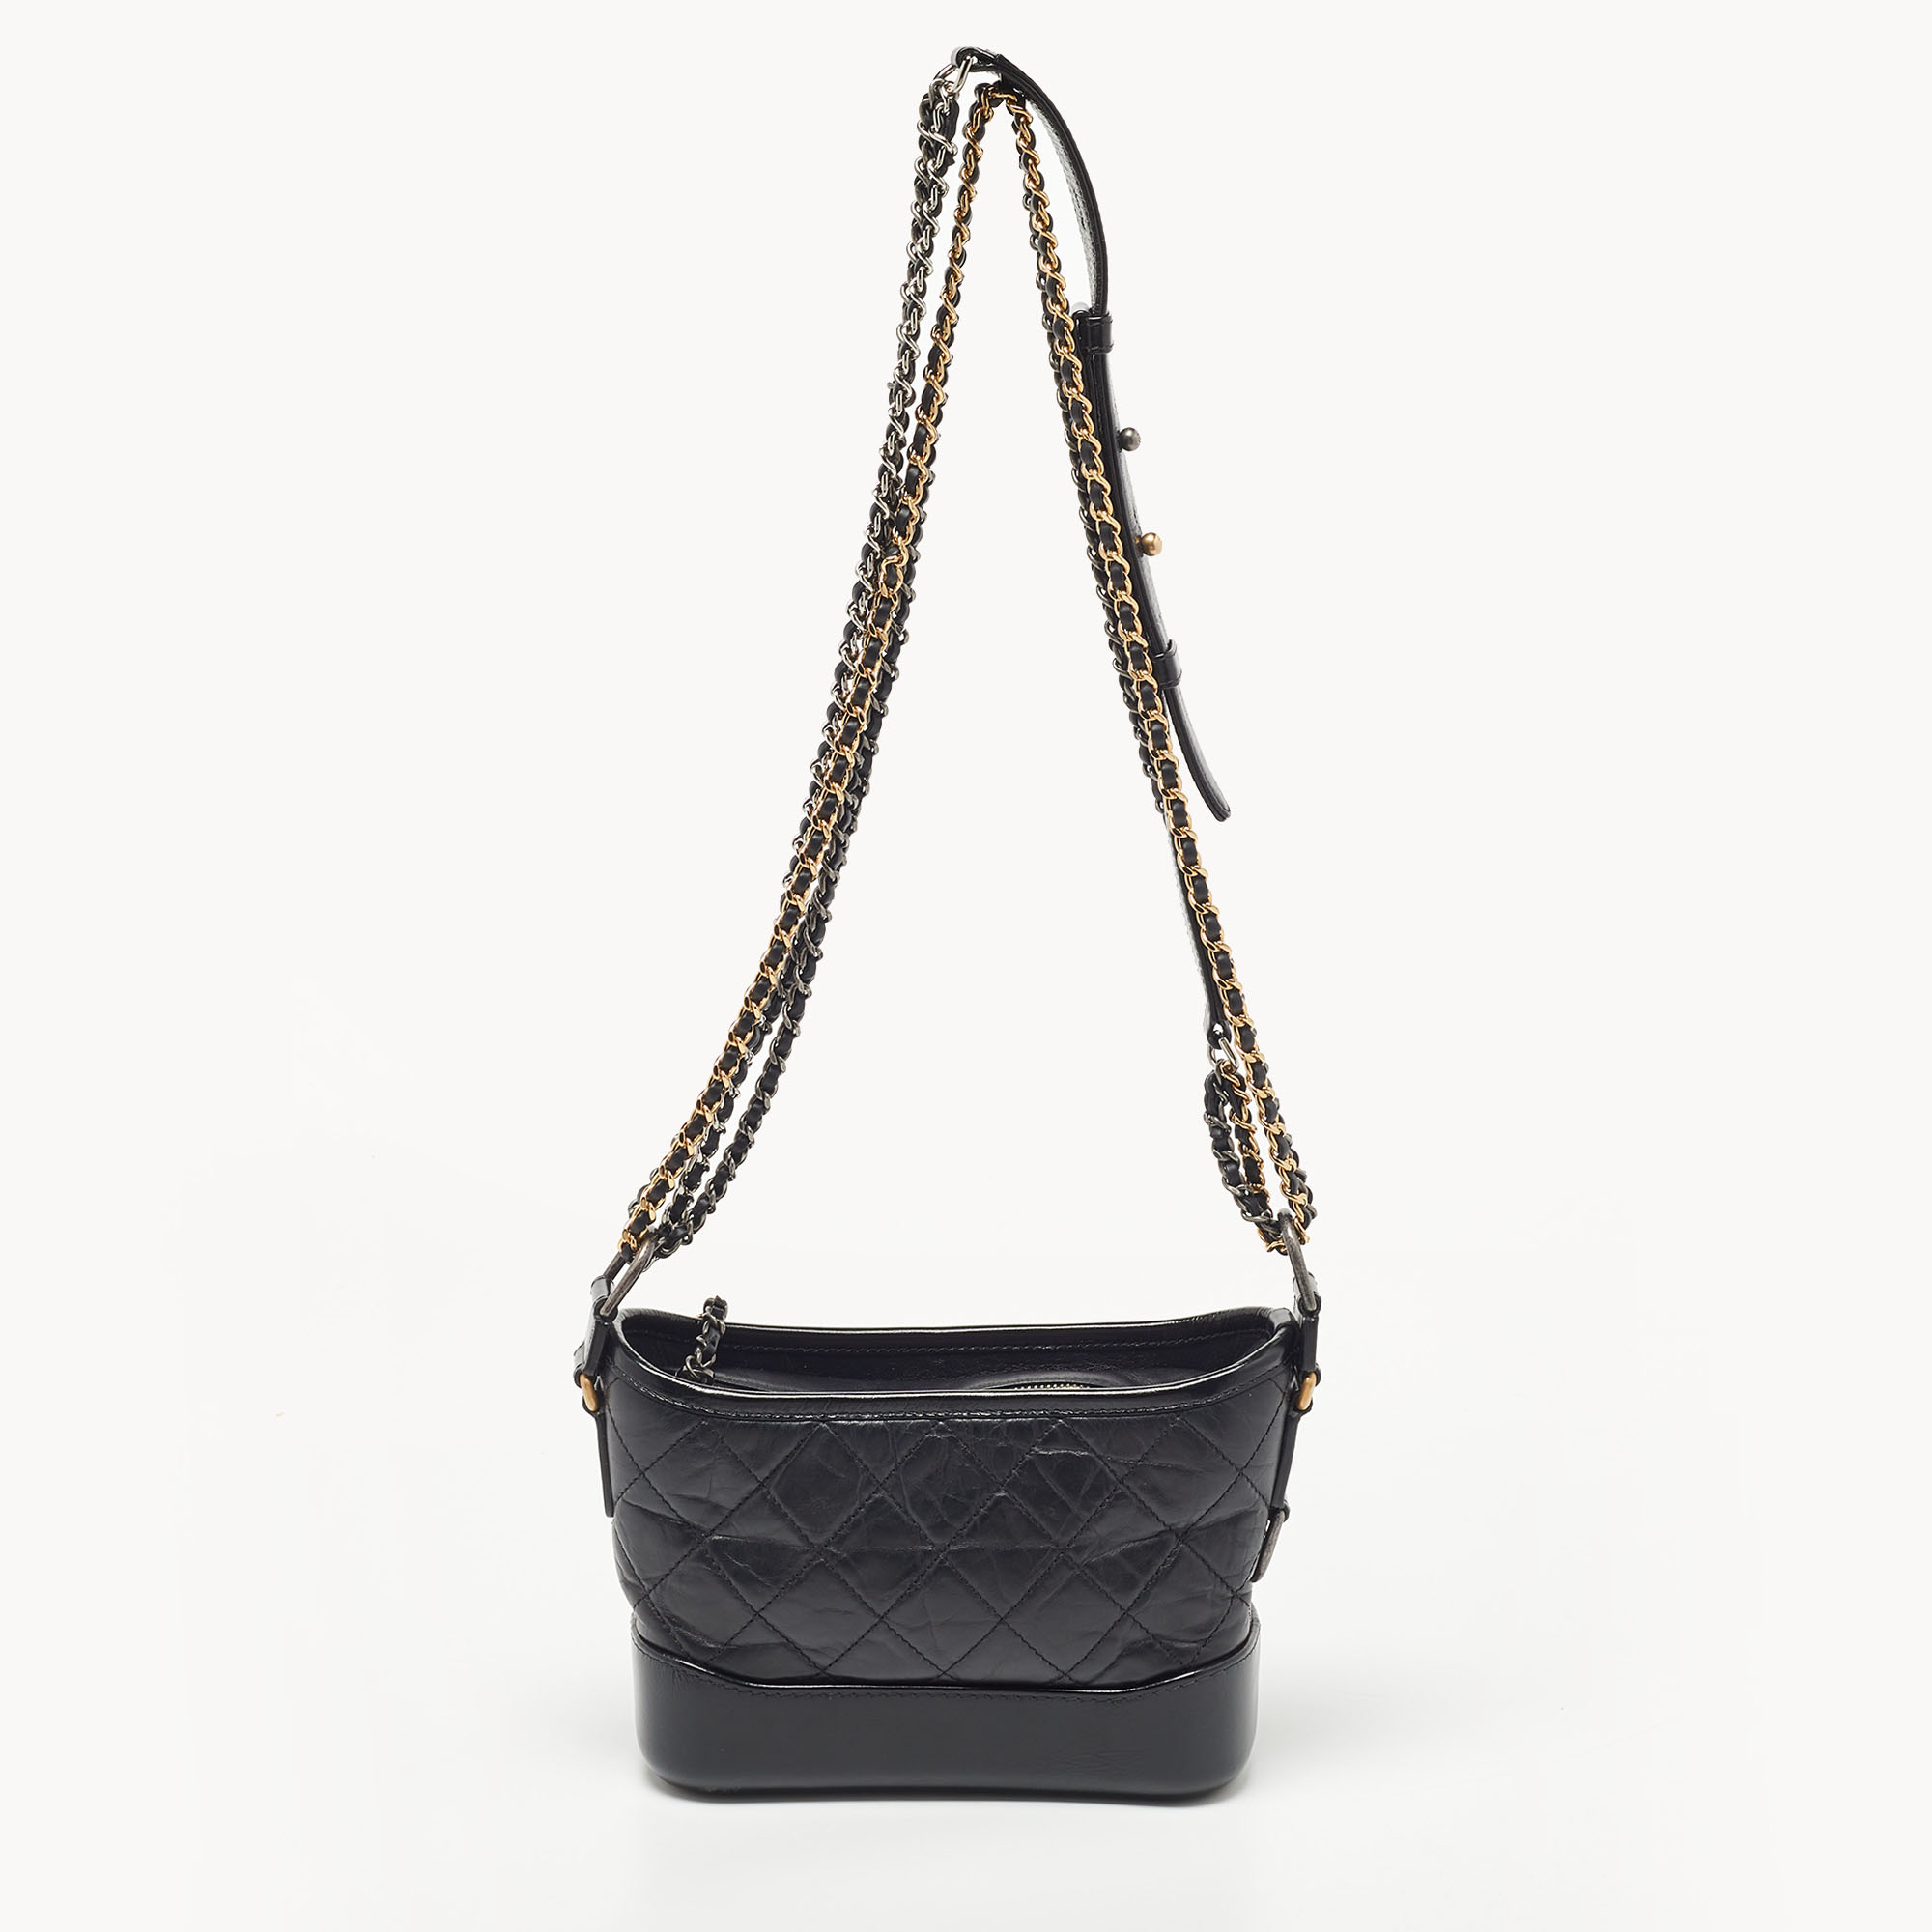 Chanel Black Quilted Aged Leather Small Gabrielle Hobo